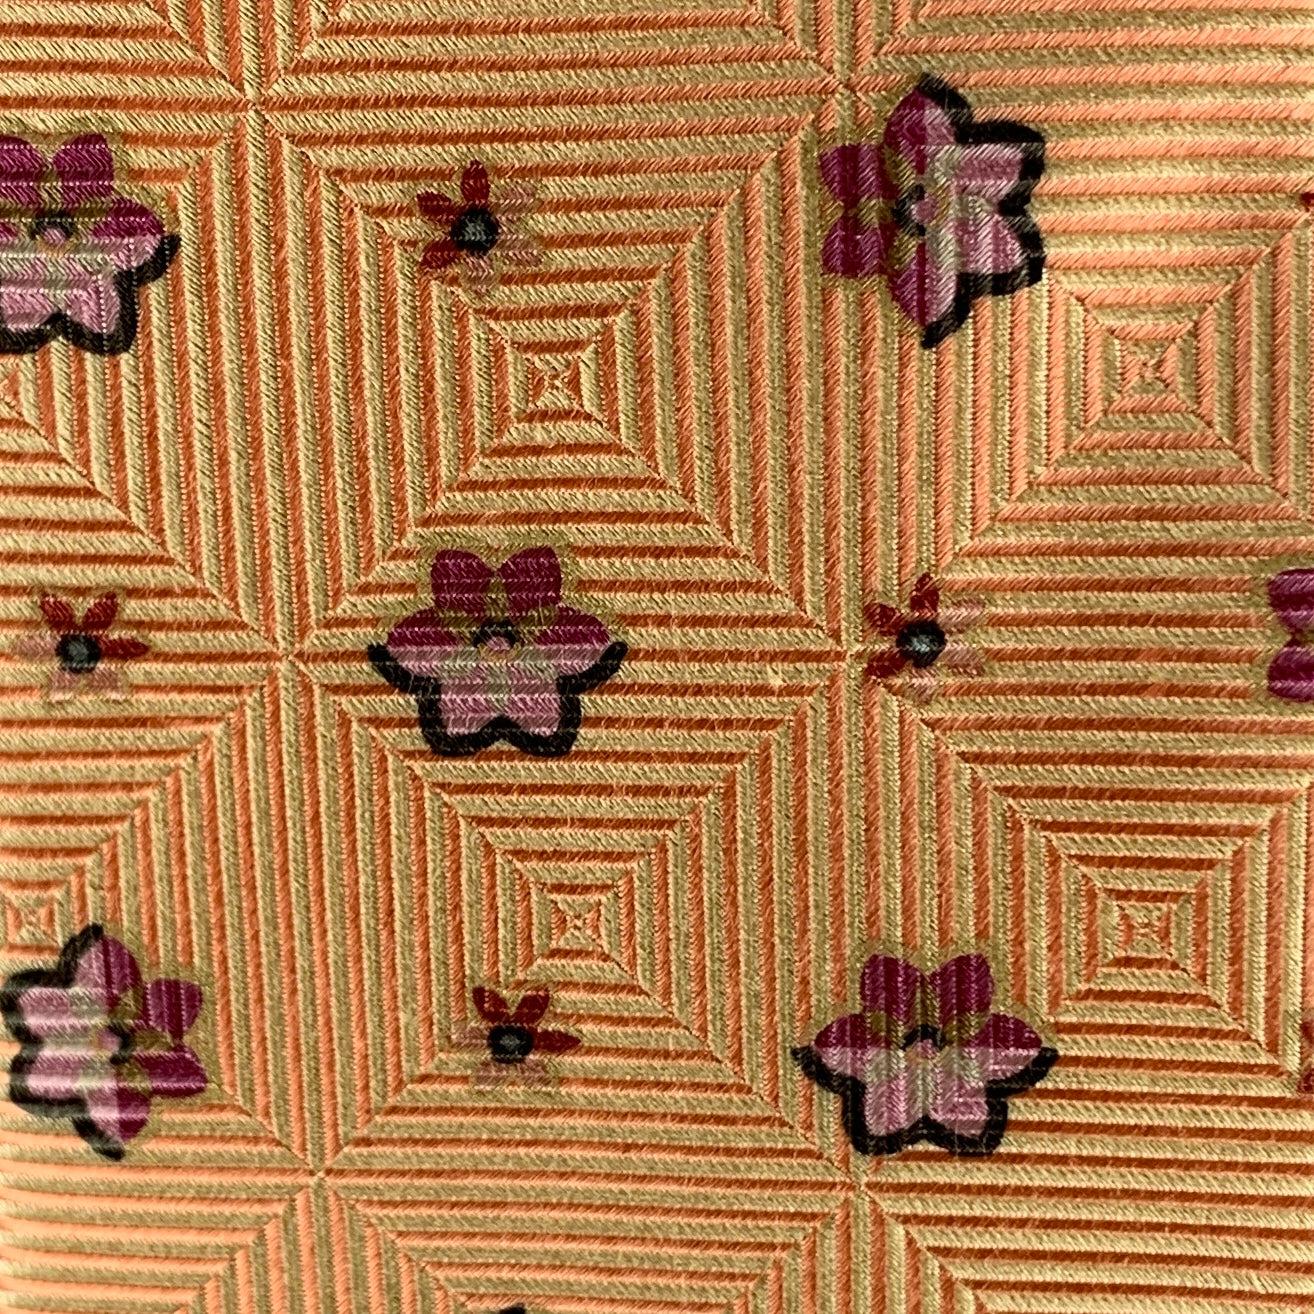 ERMENEGILDO ZEGNA classic necktie comes in orange diamond stripes with pink floral motifs. 100% silk. Made in Italy.
Very Good Pre-Owned Condition.
 

Measurements: 
  Width: 3 inches Length: 58 inches 




  
  
 
Reference: 124767
Category: